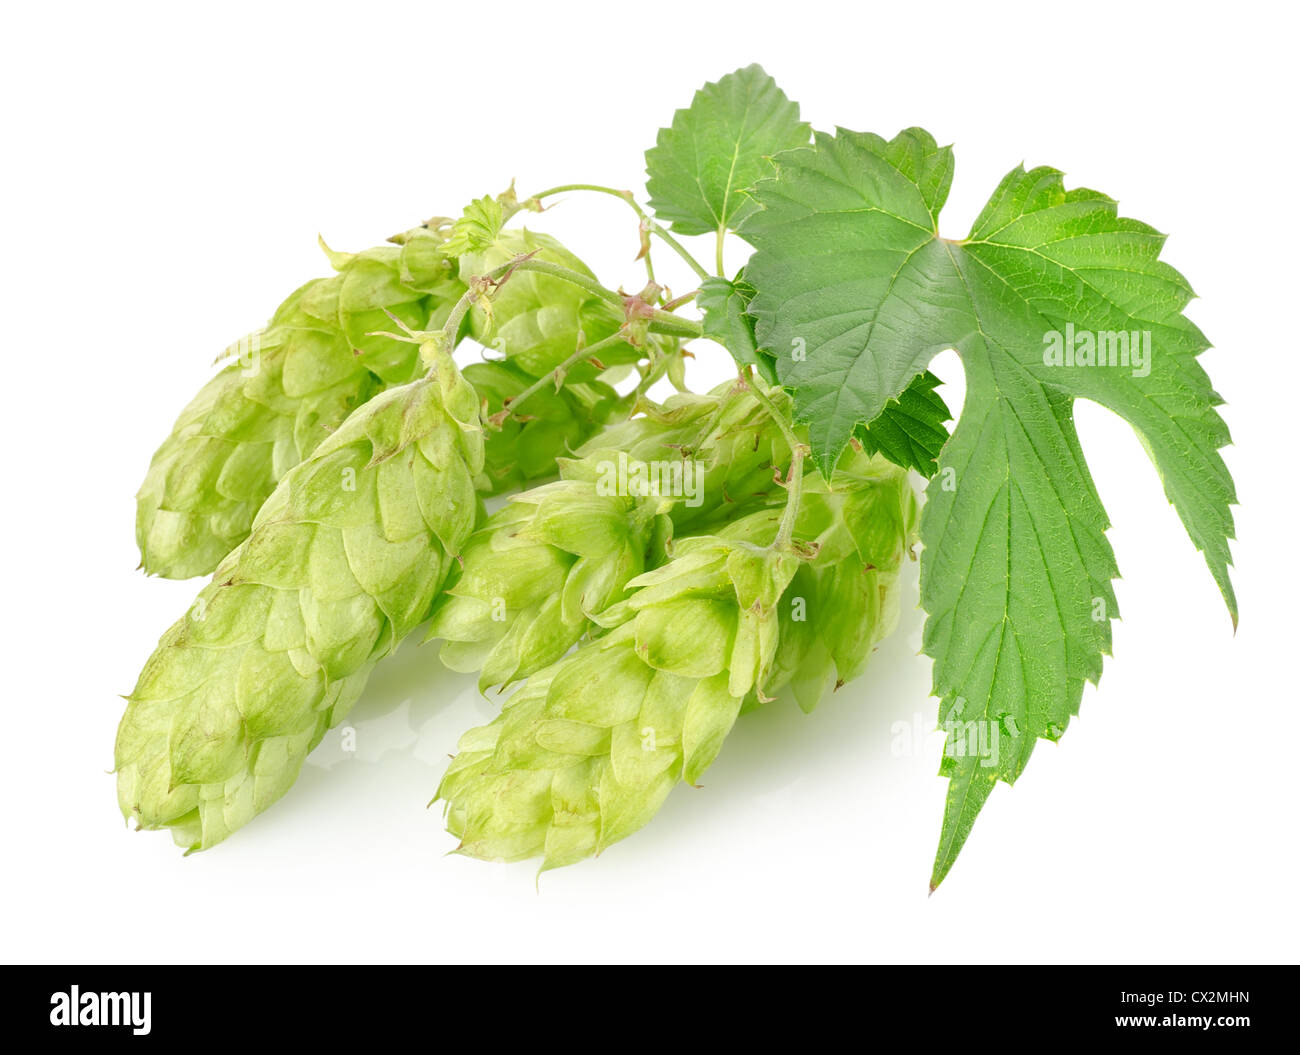 Cluster of hops with leafs isolated on white background Stock Photo